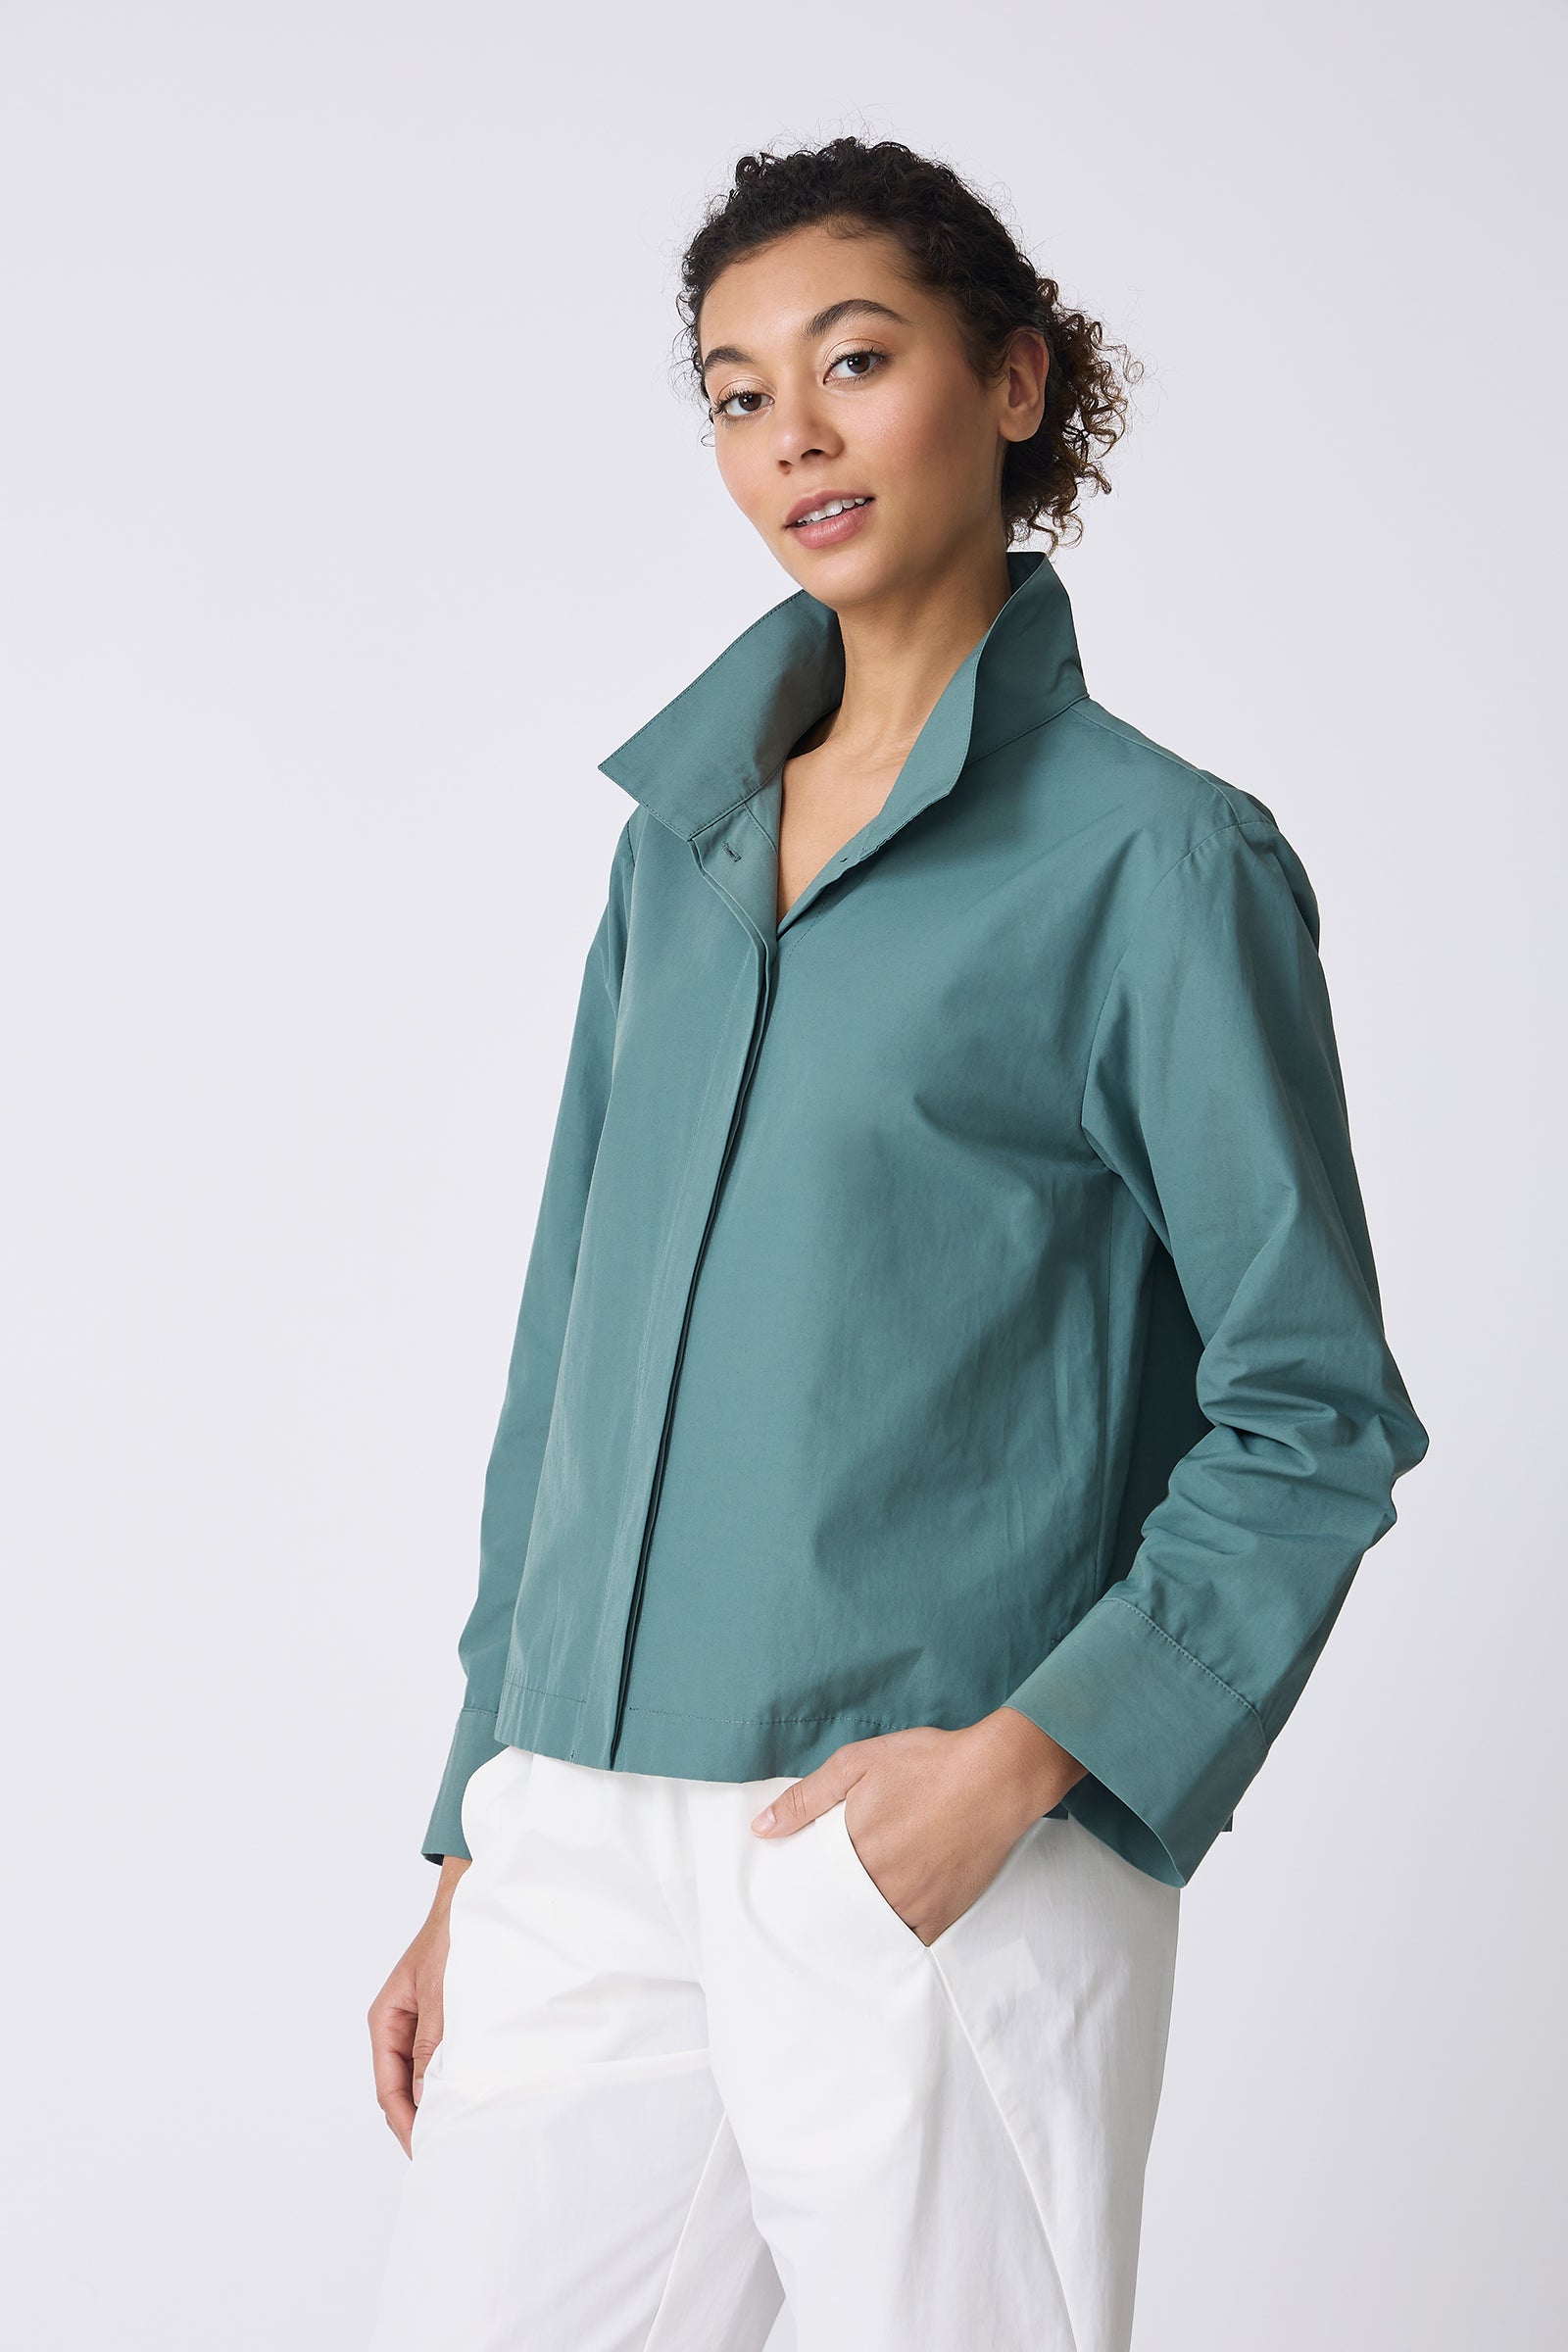 Kal Rieman Peggy Collared Shirt in Sage on model with hand in pocket front view